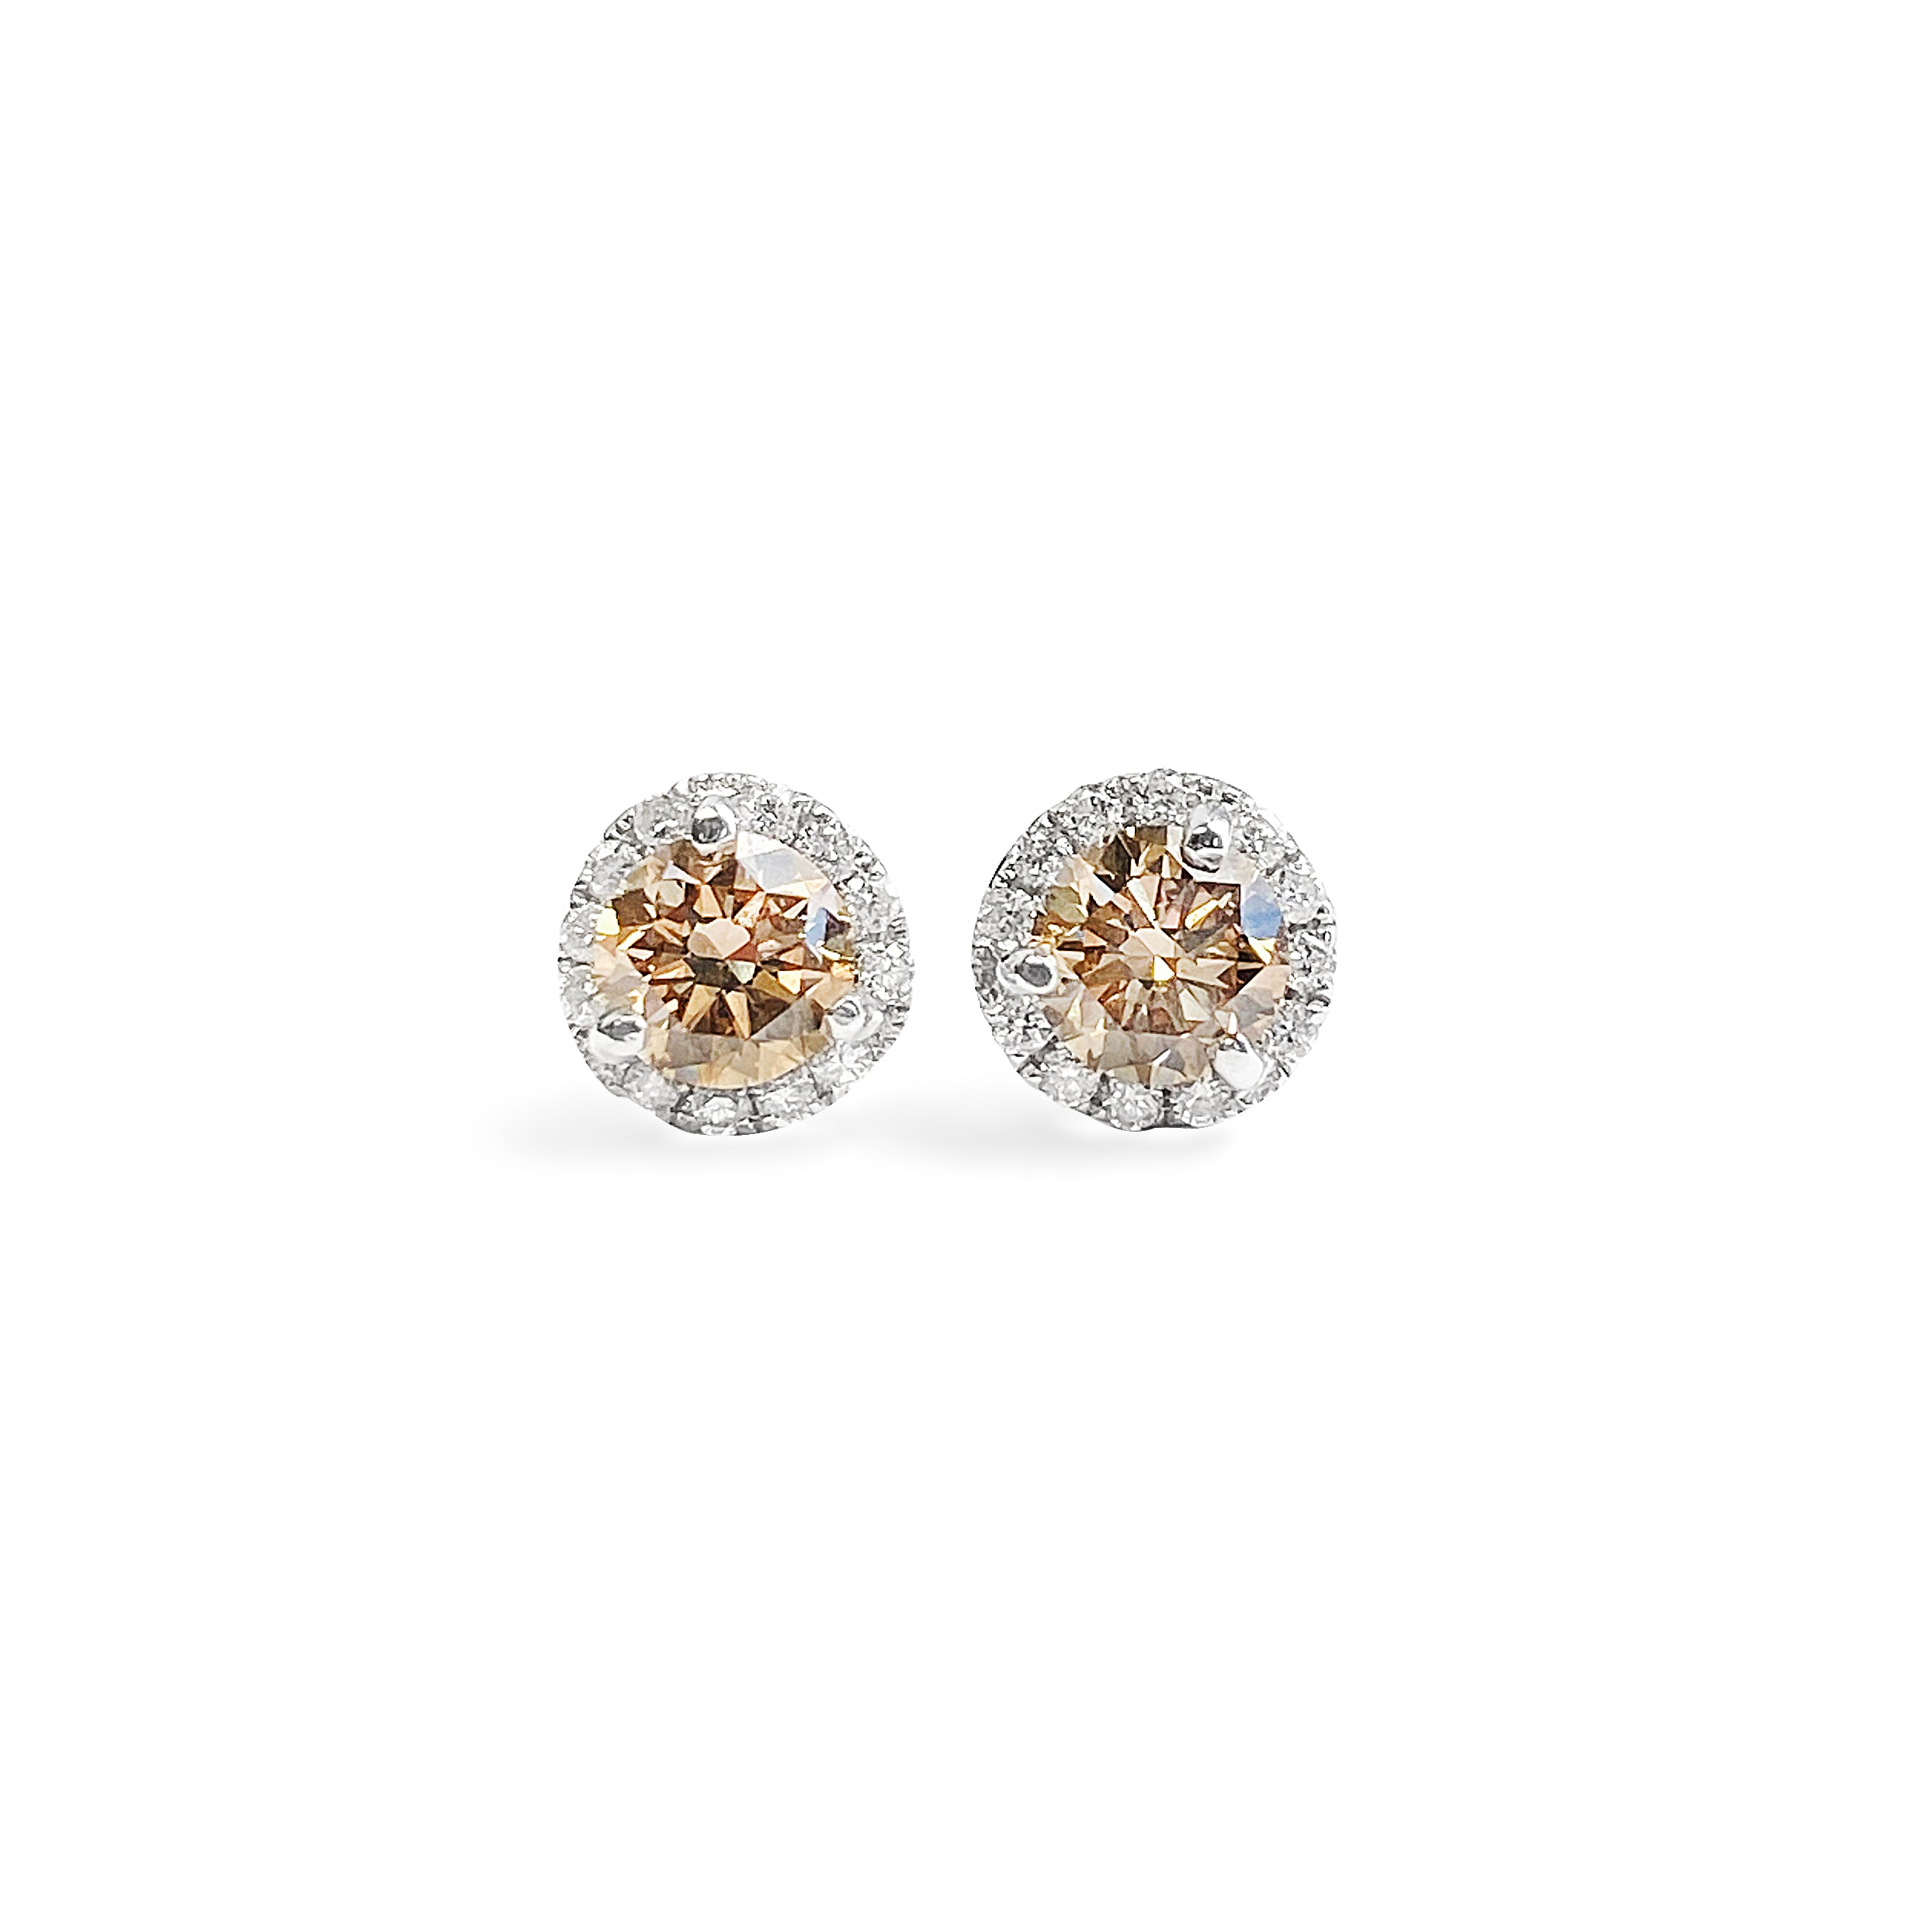 1.22 Round Brilliant Brown Diamond Earrings with Halo